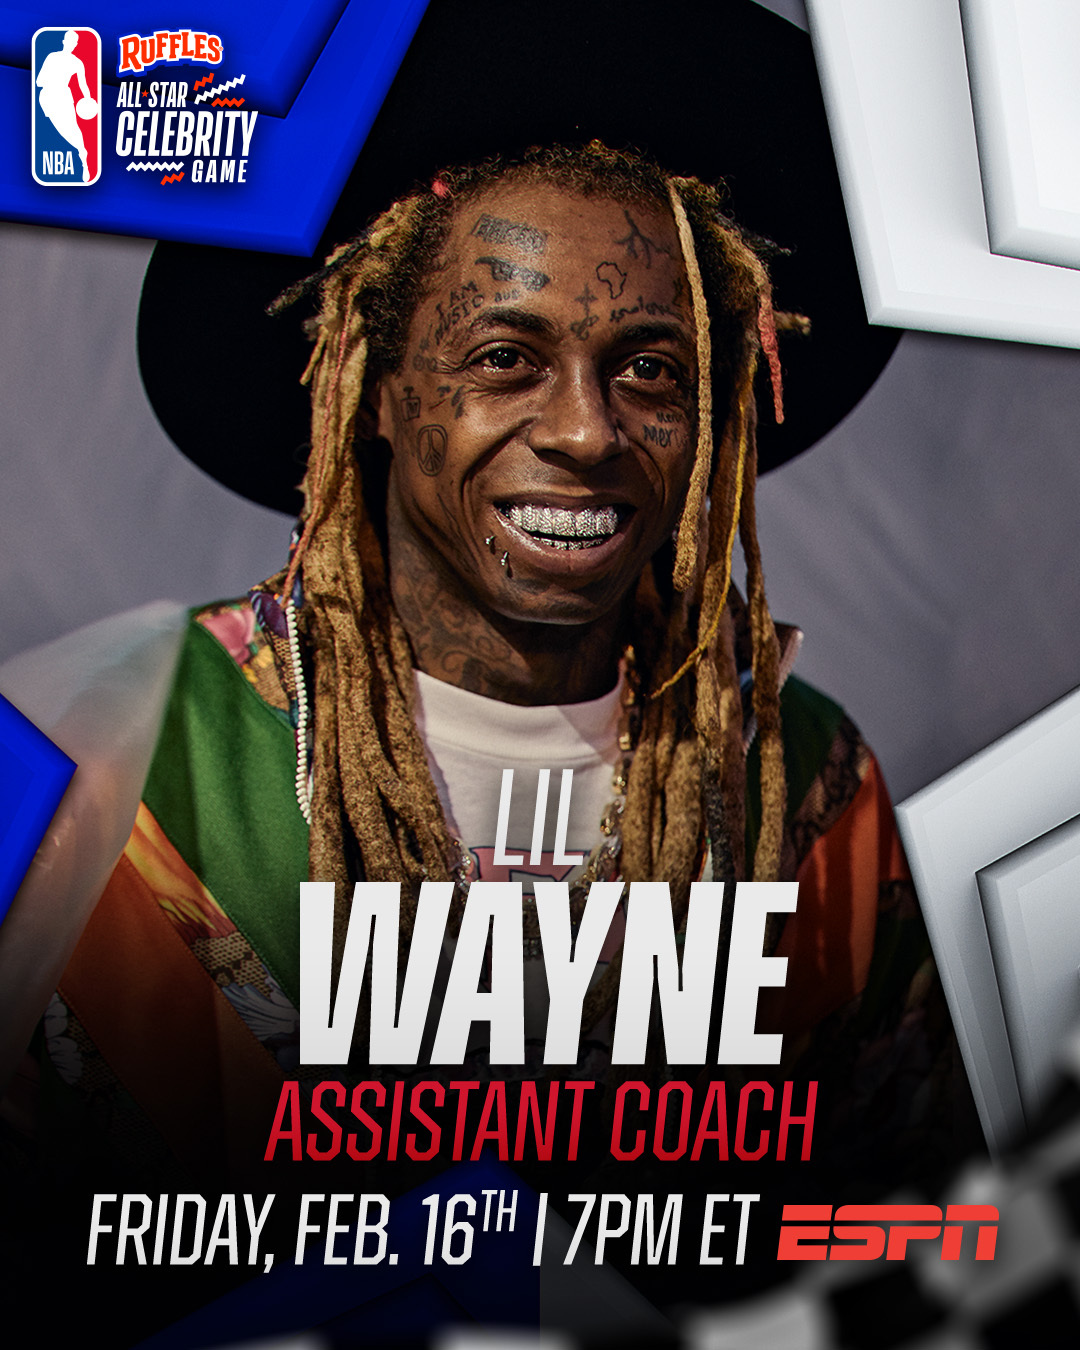 Lil Wayne & 50 Cent Announced As Assistant Coaches For The NBA All Star Celebrity Game